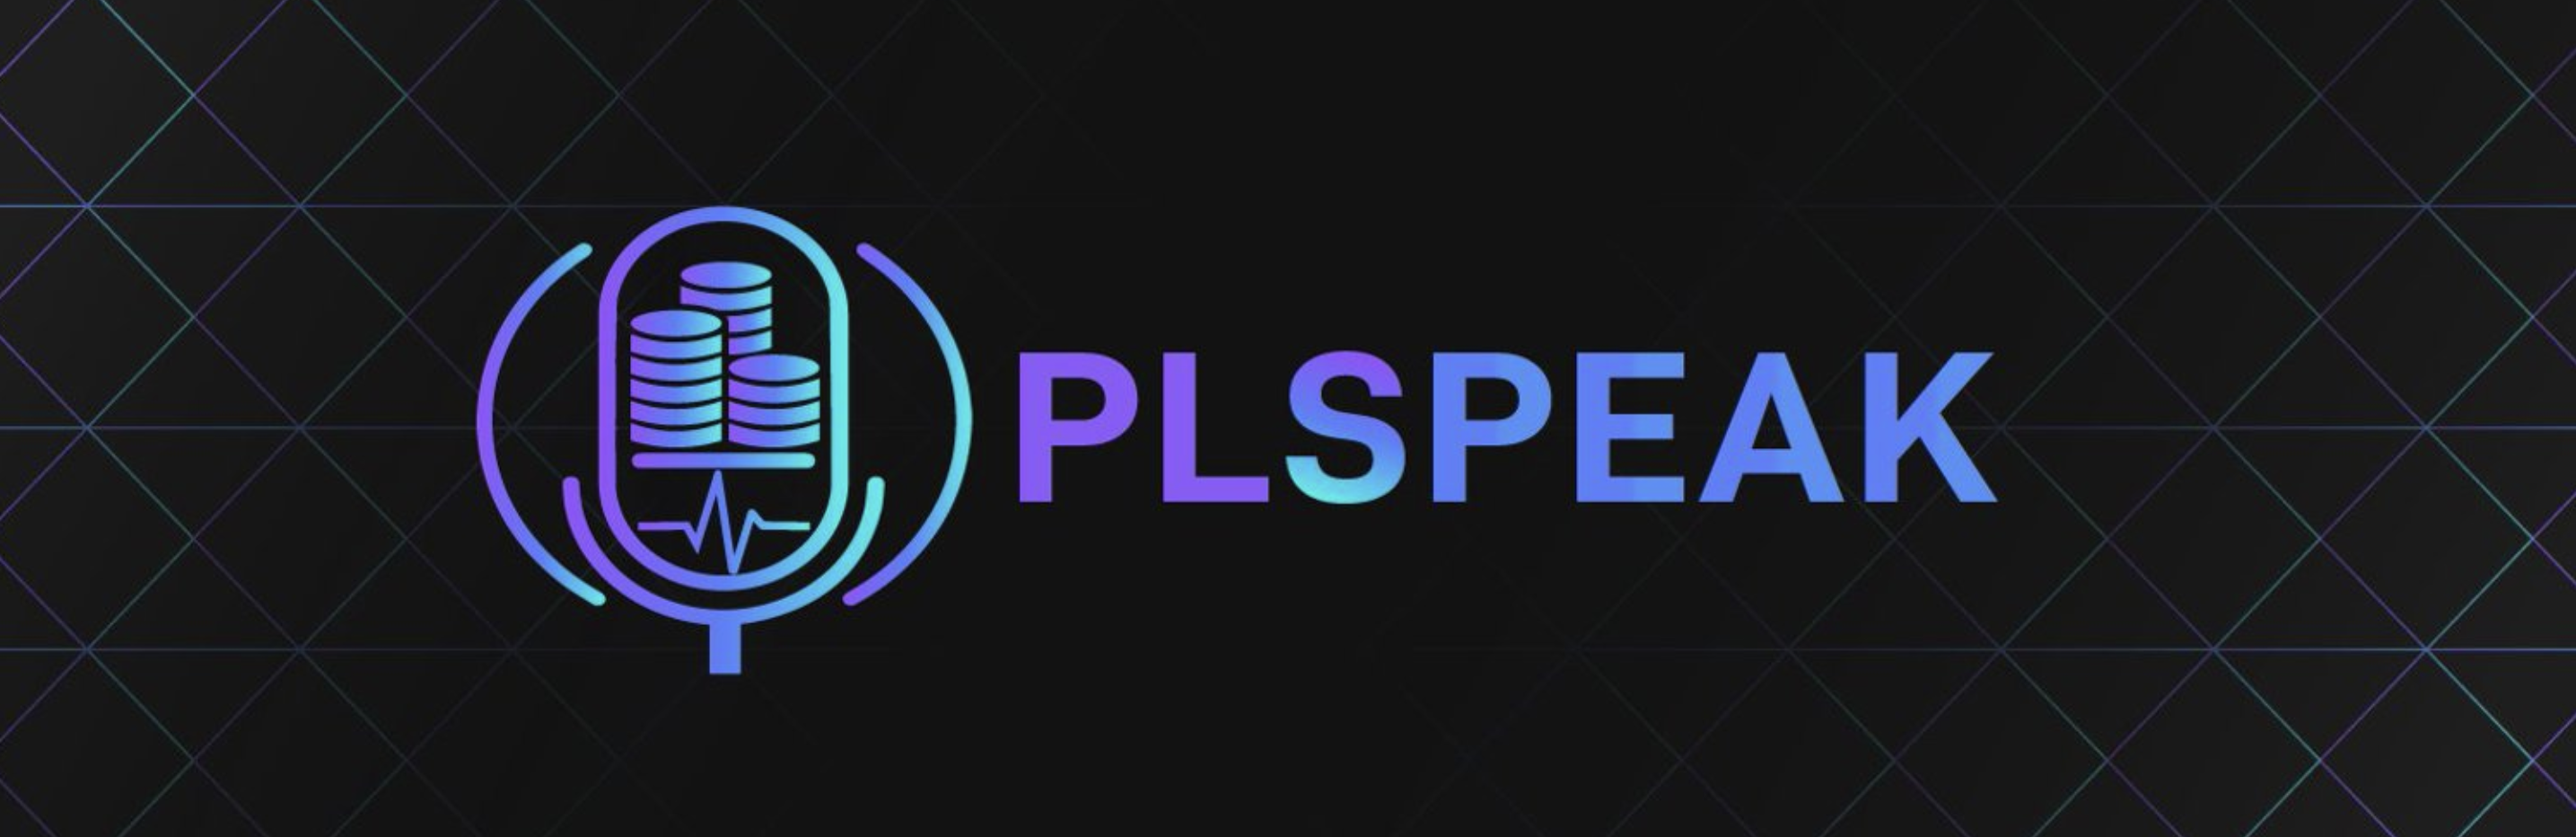 Featured image for “PLSPEAK Project Updates”